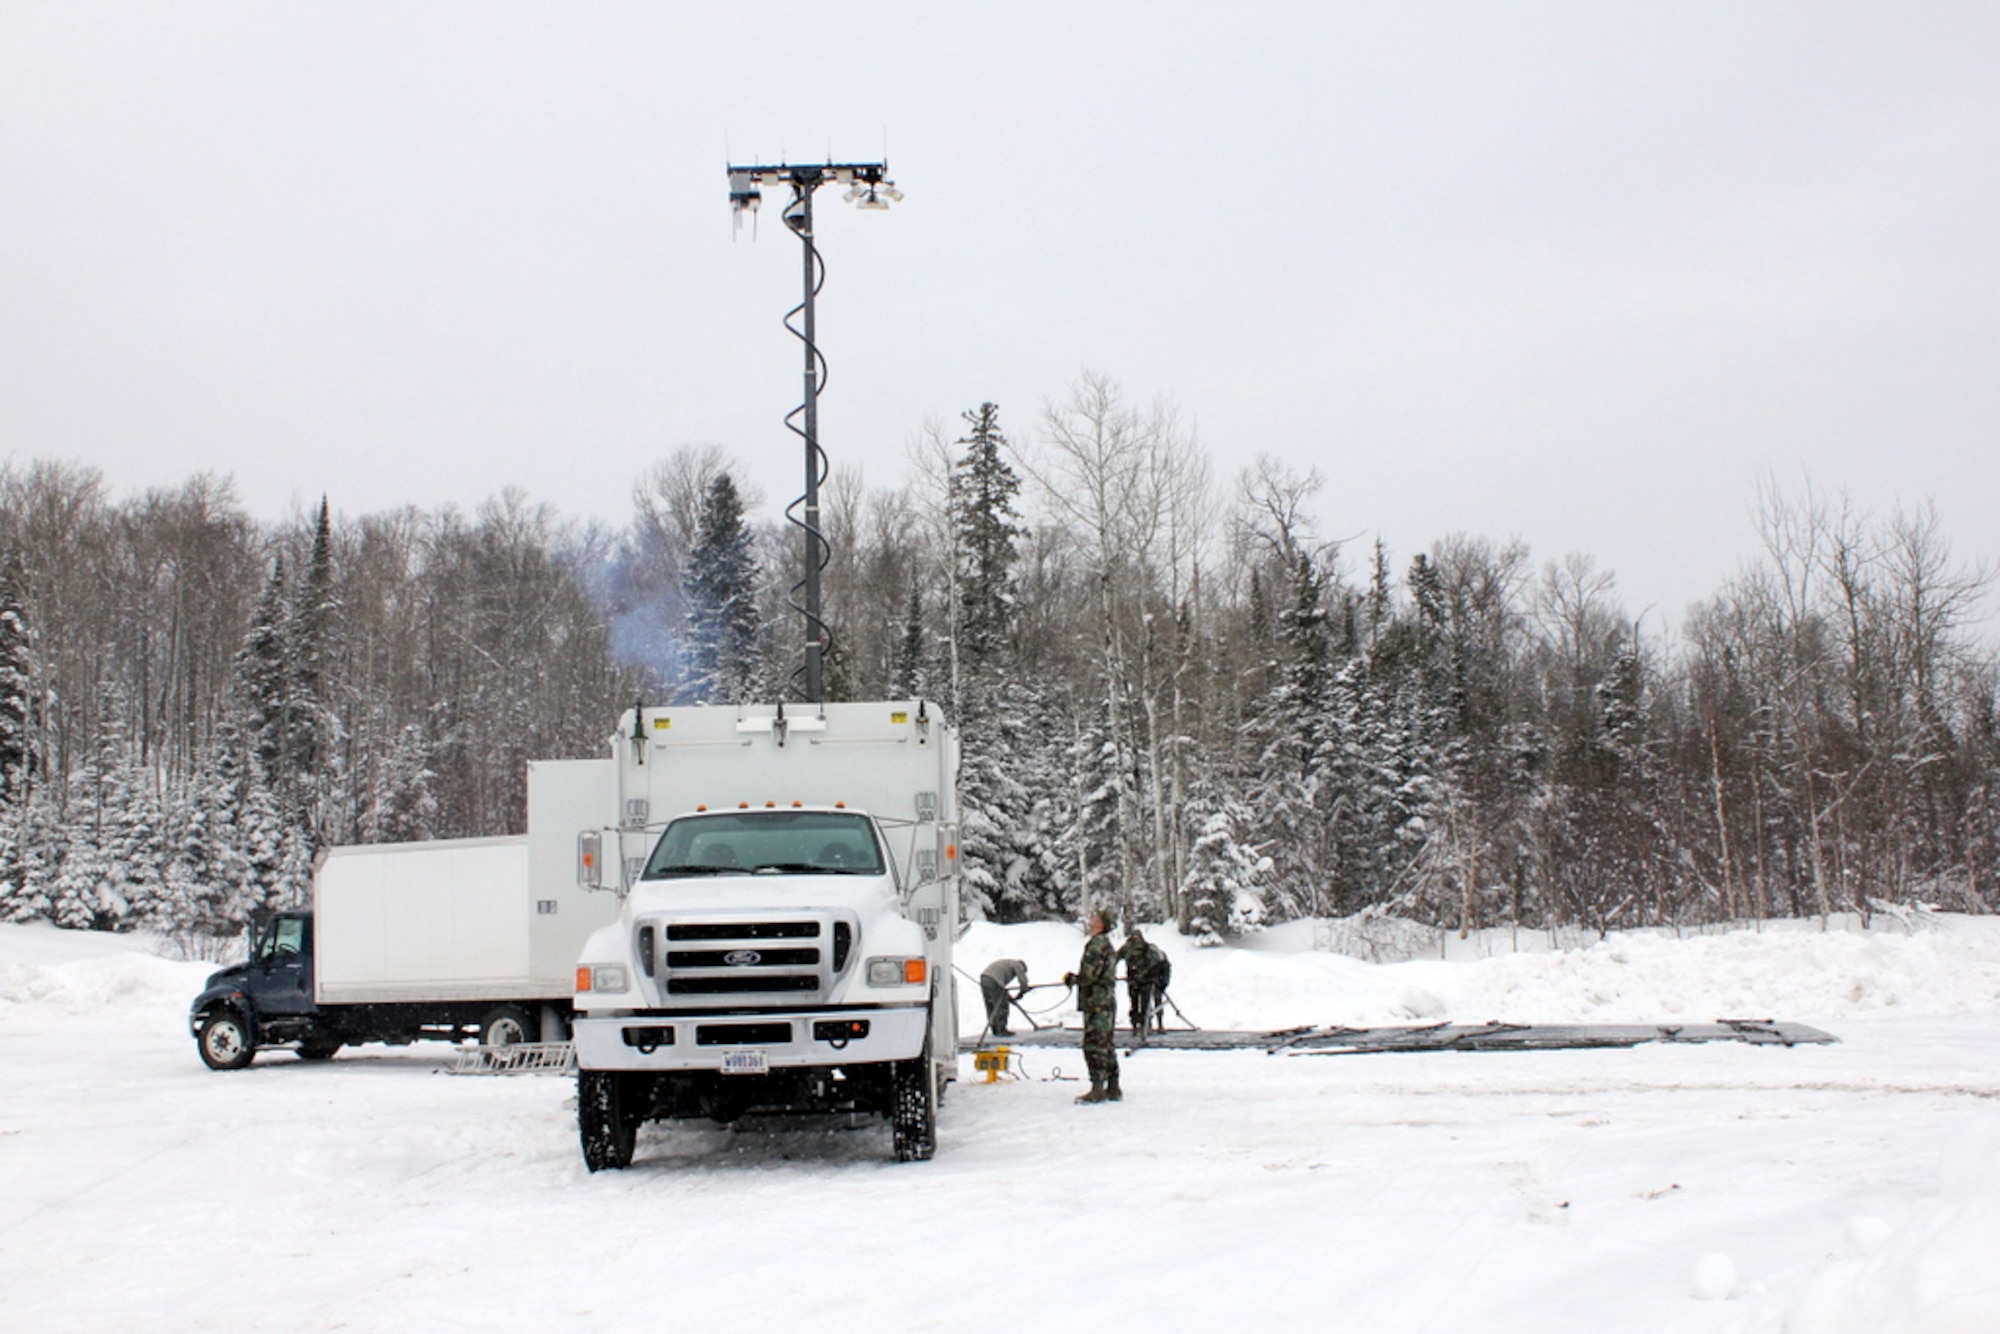 Members of the 148th Fighter Wing, Communications Flight, Deployable Interoperable Communications Element (DICE) are seen setting up equipment at their deployed location in support of the John Beargrease Sled Dog Marathon.  The 148th Communication Flight has been supporting the Beargrease Sled Dog Marathon since 1995.  U.S. Air Force photo by MSgt Richard Kaufman.  (Released)

